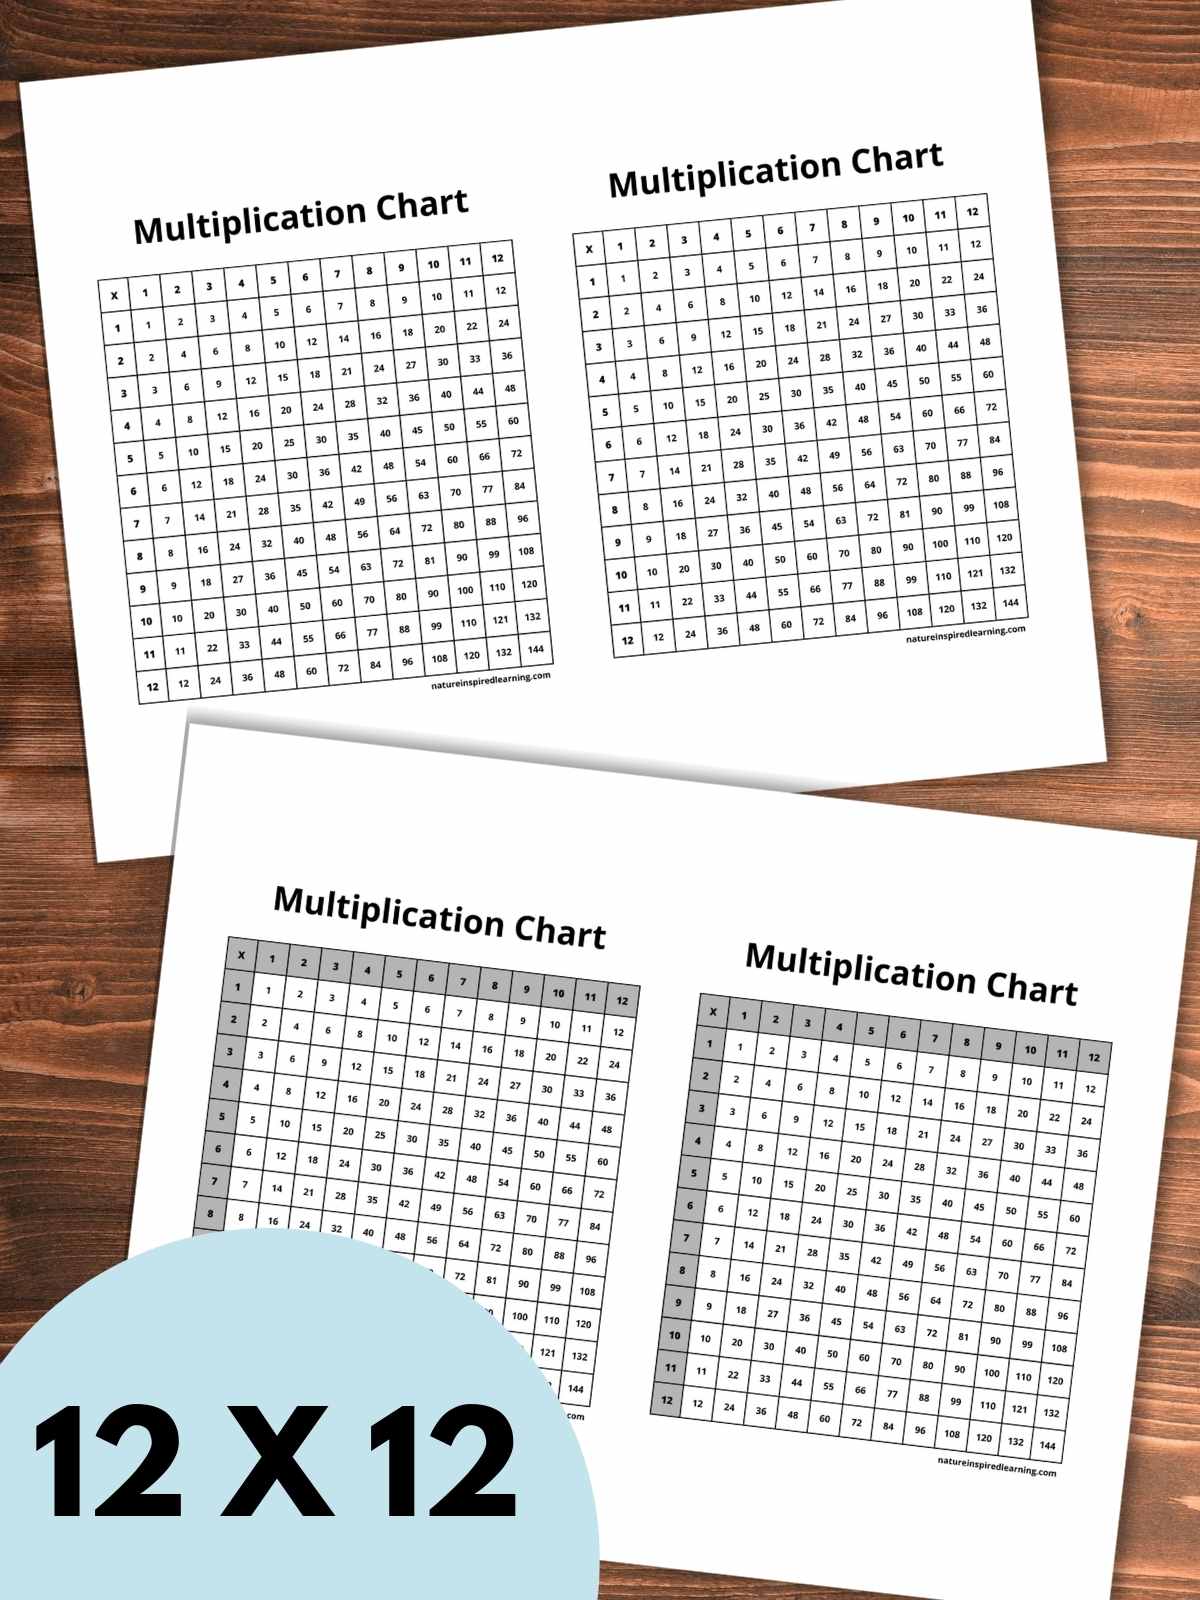 Two printables with two 12 by 12 multiplication grids on each overlapping on a wooden background. Light blue half circle with text overlay bottom left corner